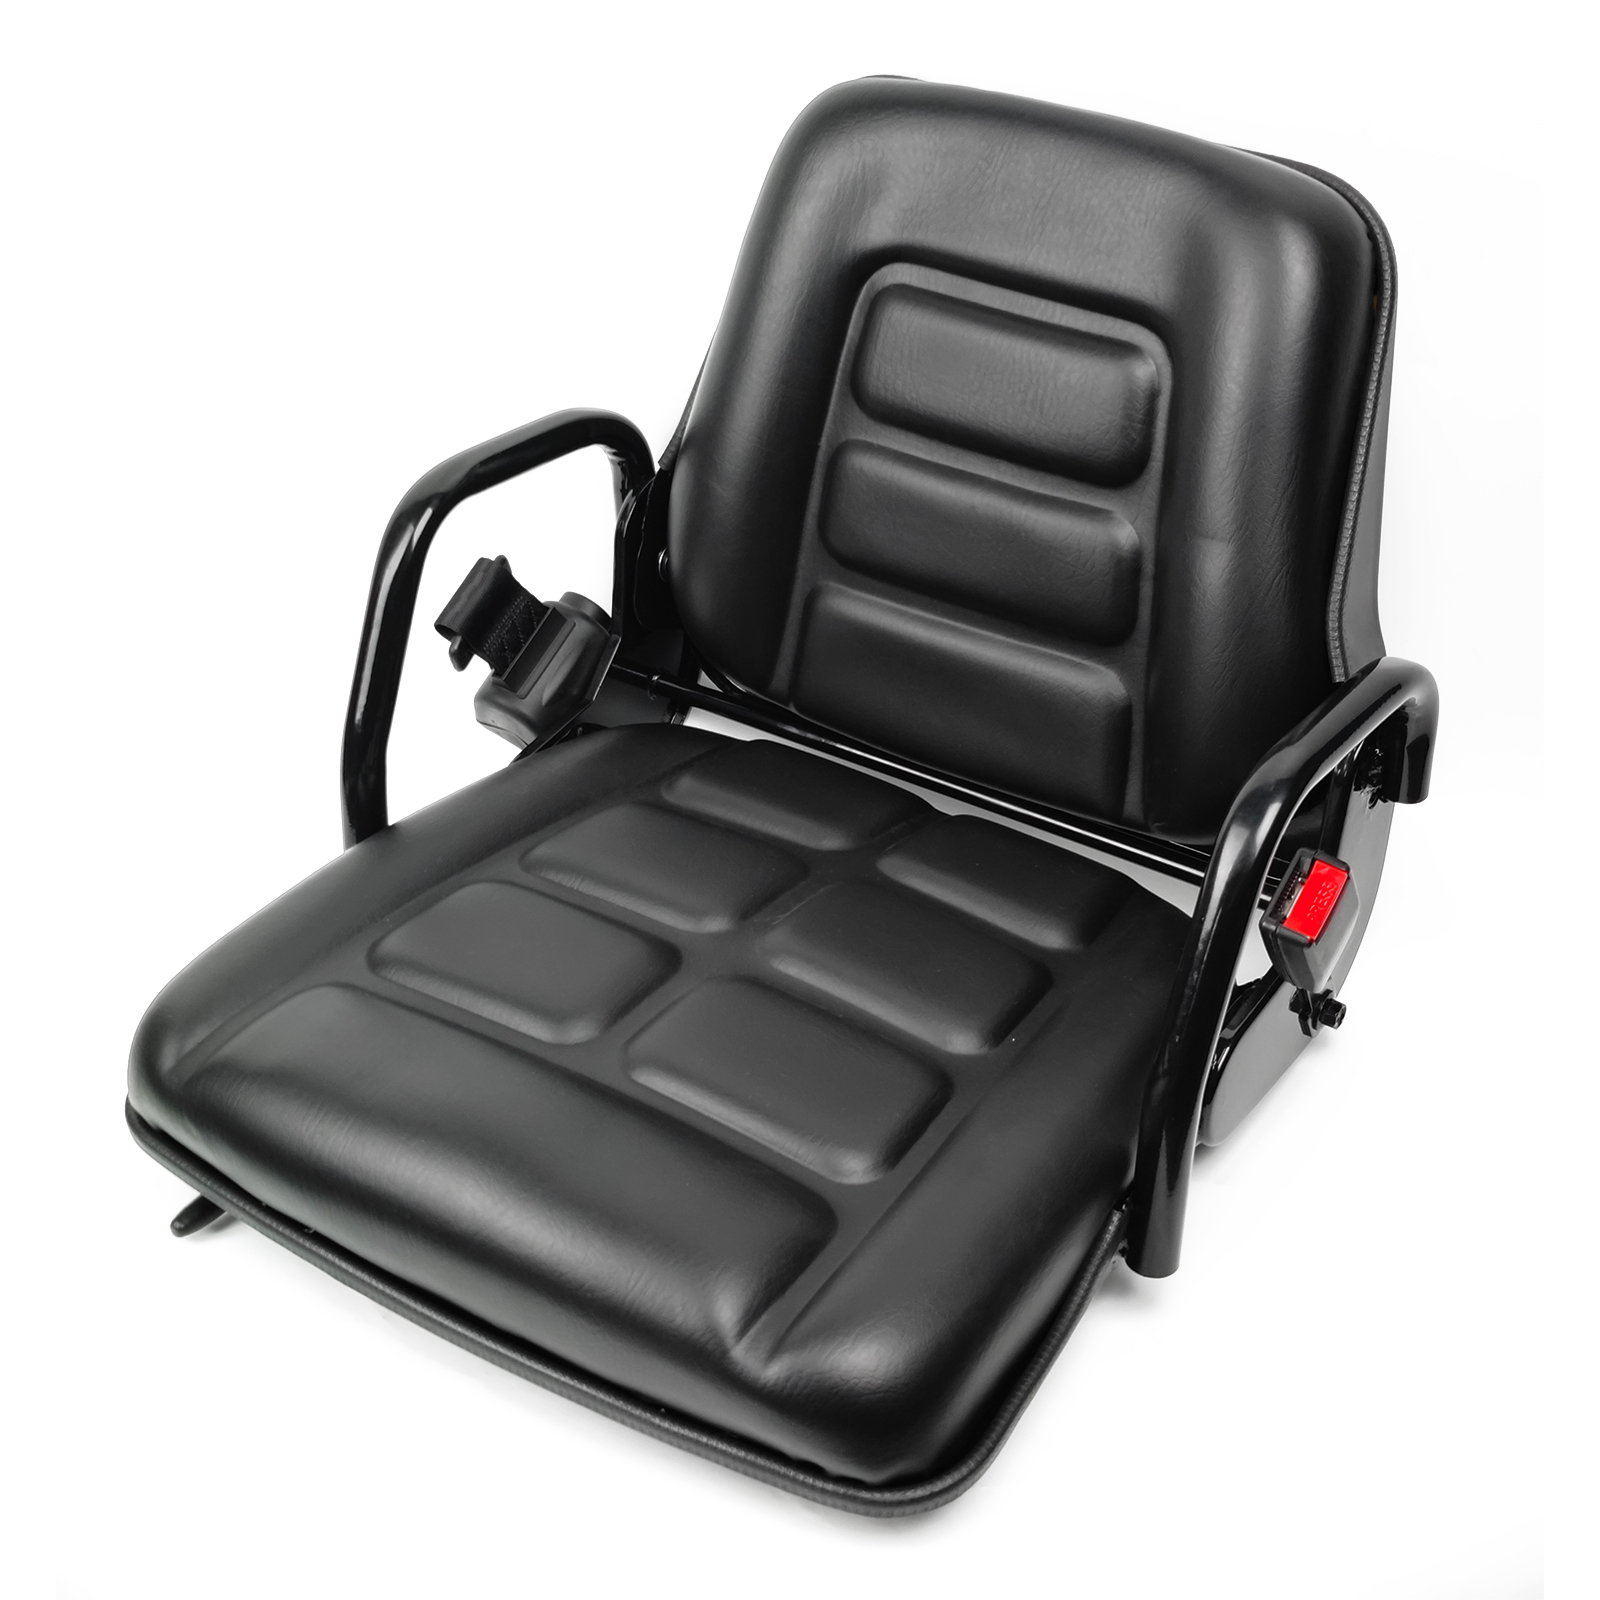 China New Product Truck Suspension Seats - Forklift Seat with Integrated Steel Armrest Fold Down Backrest Fits Caterpillar Mitsubishi Doosan forklifts – Qinglin Seat